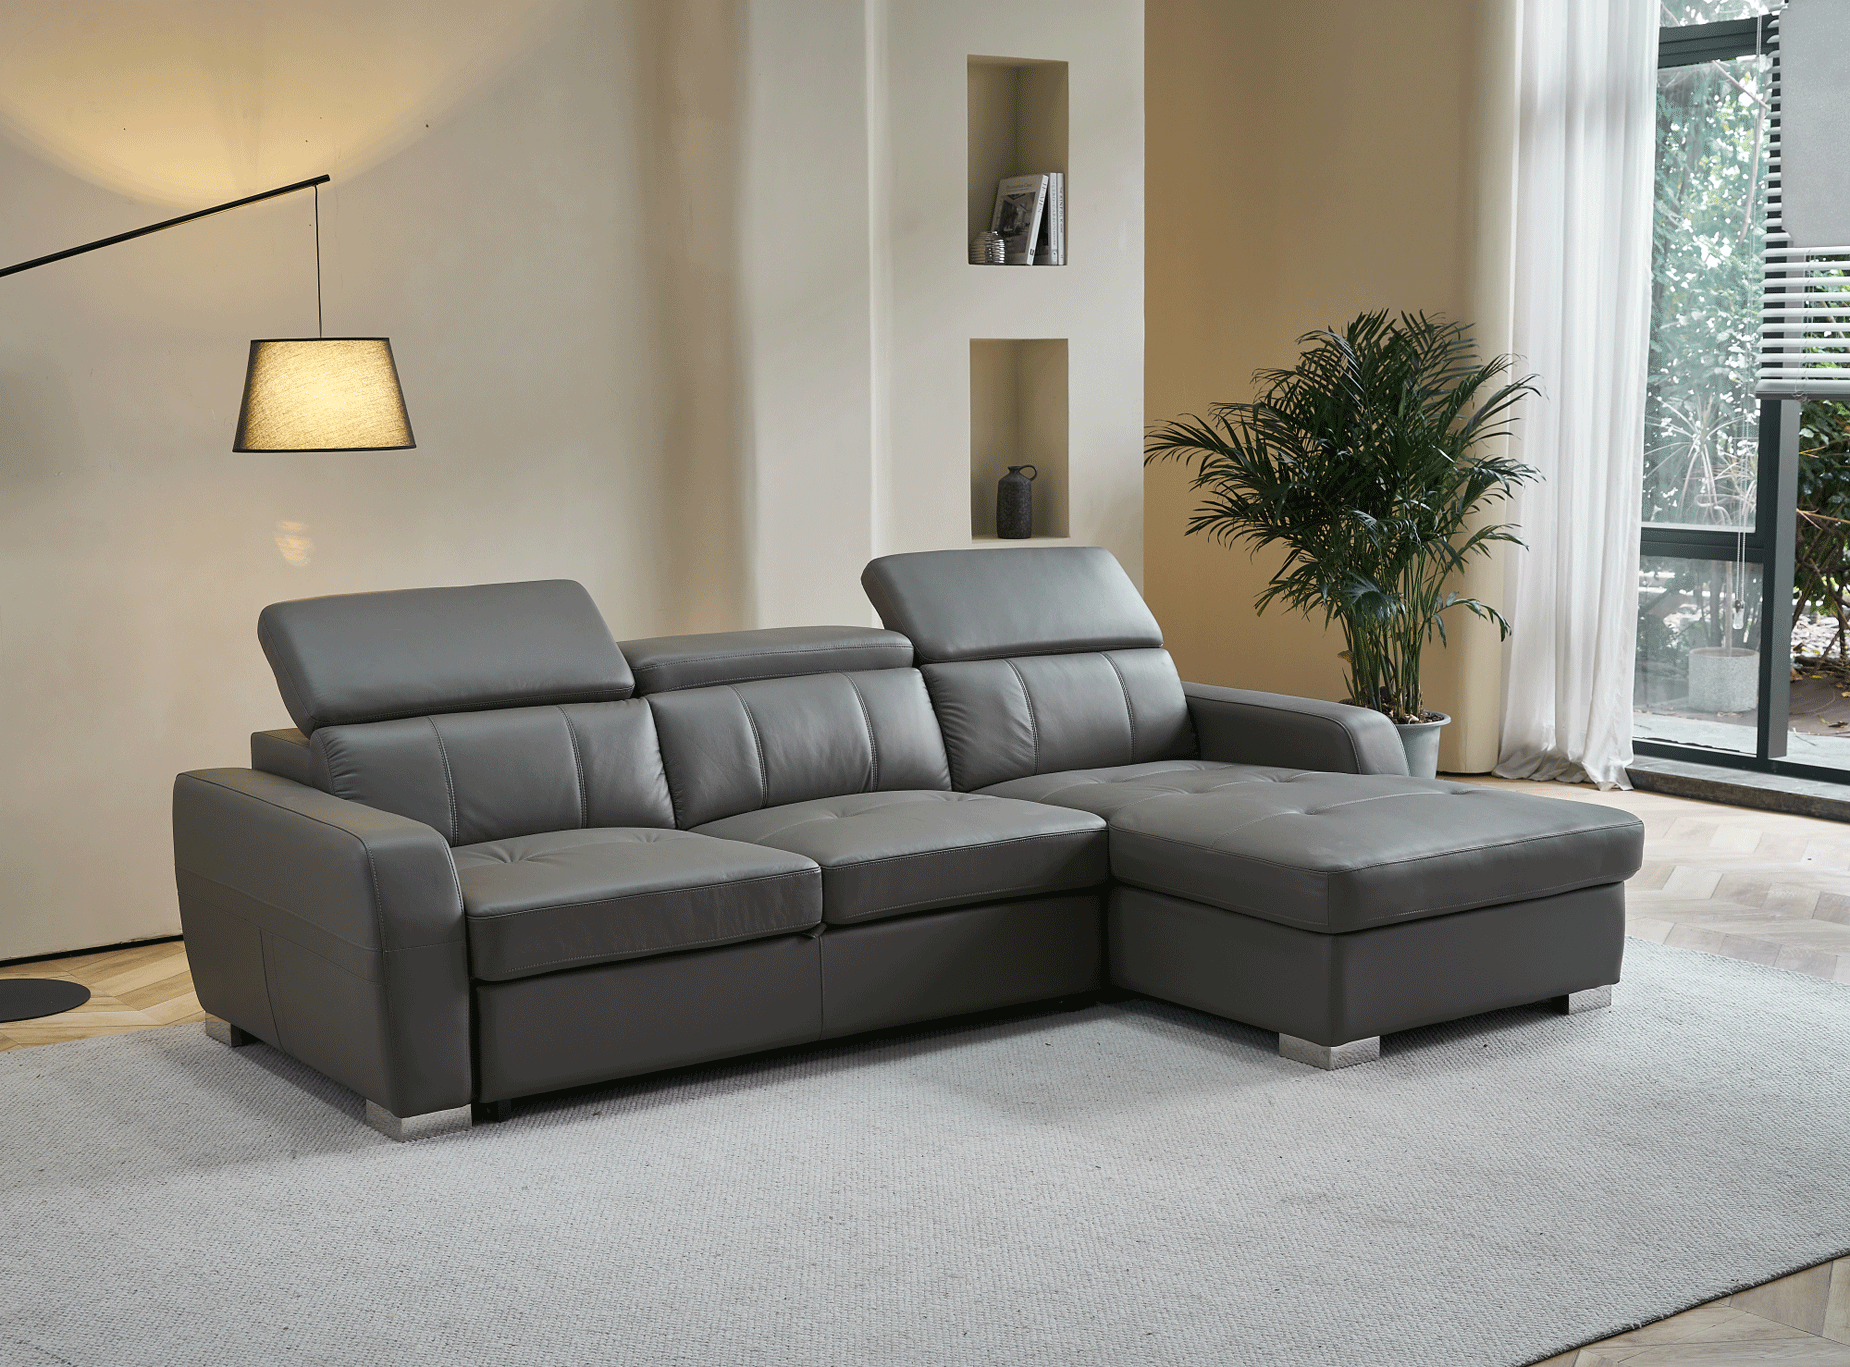 Brands Franco AZKARY II CONSOLES, Spain 1822 GREY Sectional Right w/Bed